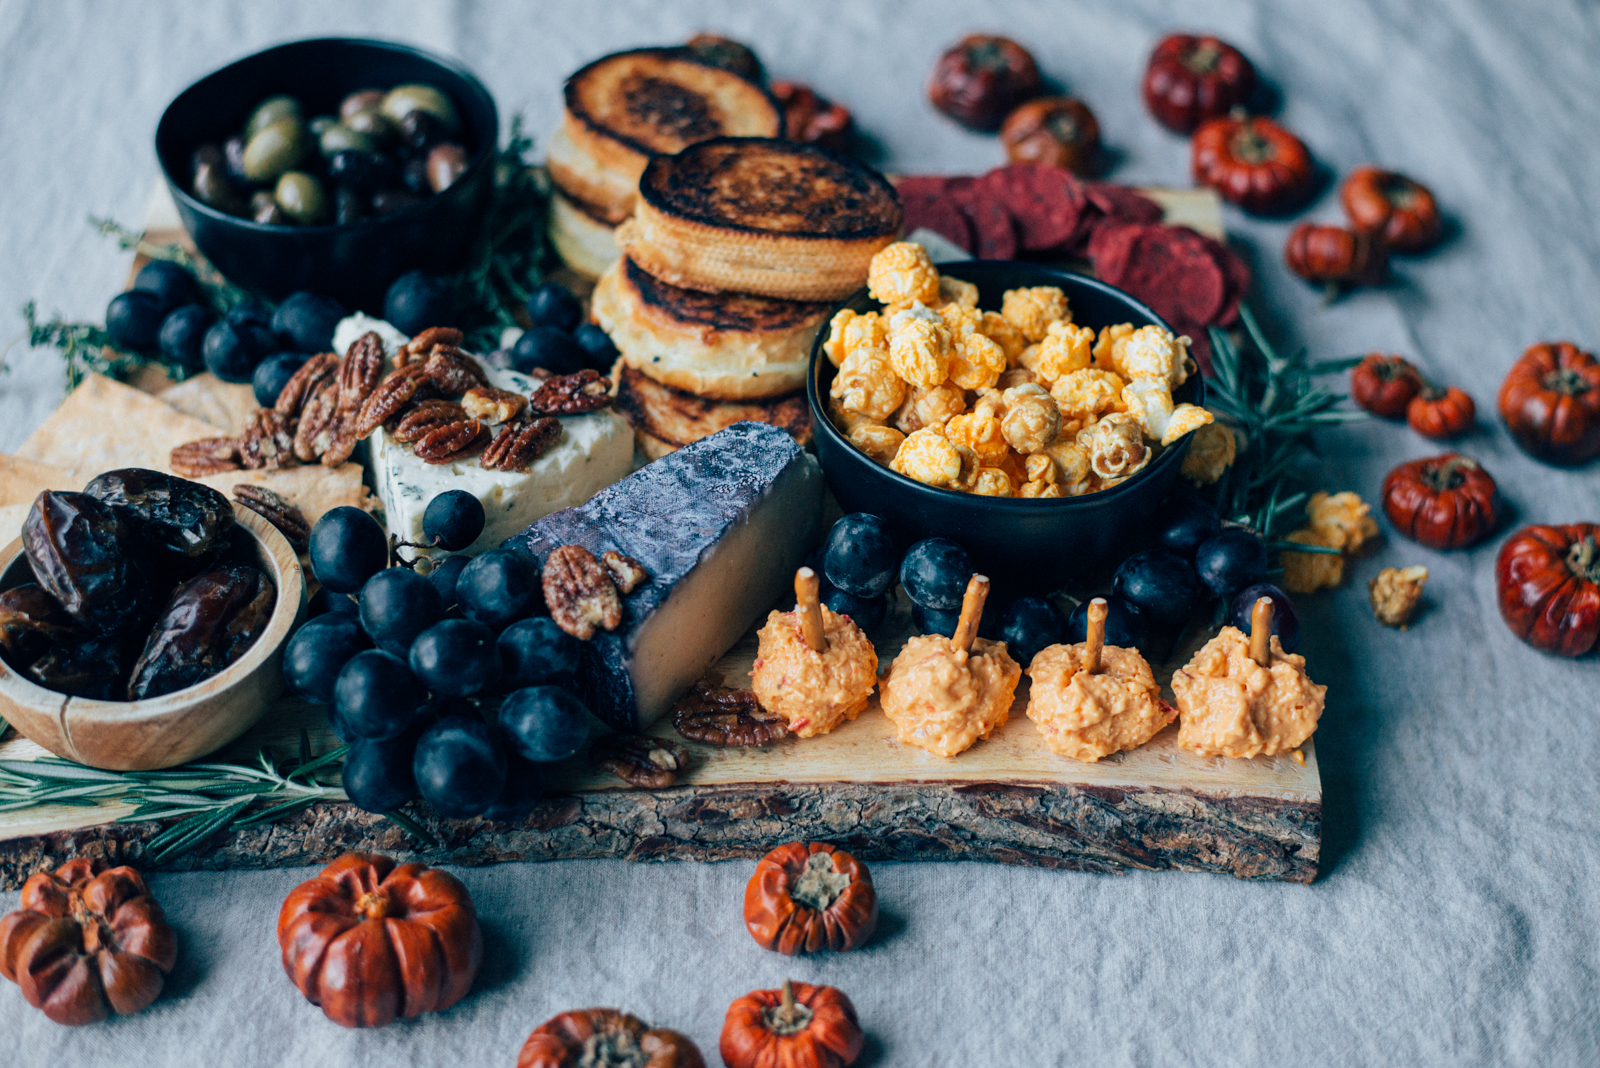 mini pimento cheese pumpkins on cheese board with maple glazed pecans, black grapes, olives, dates, and popcorn